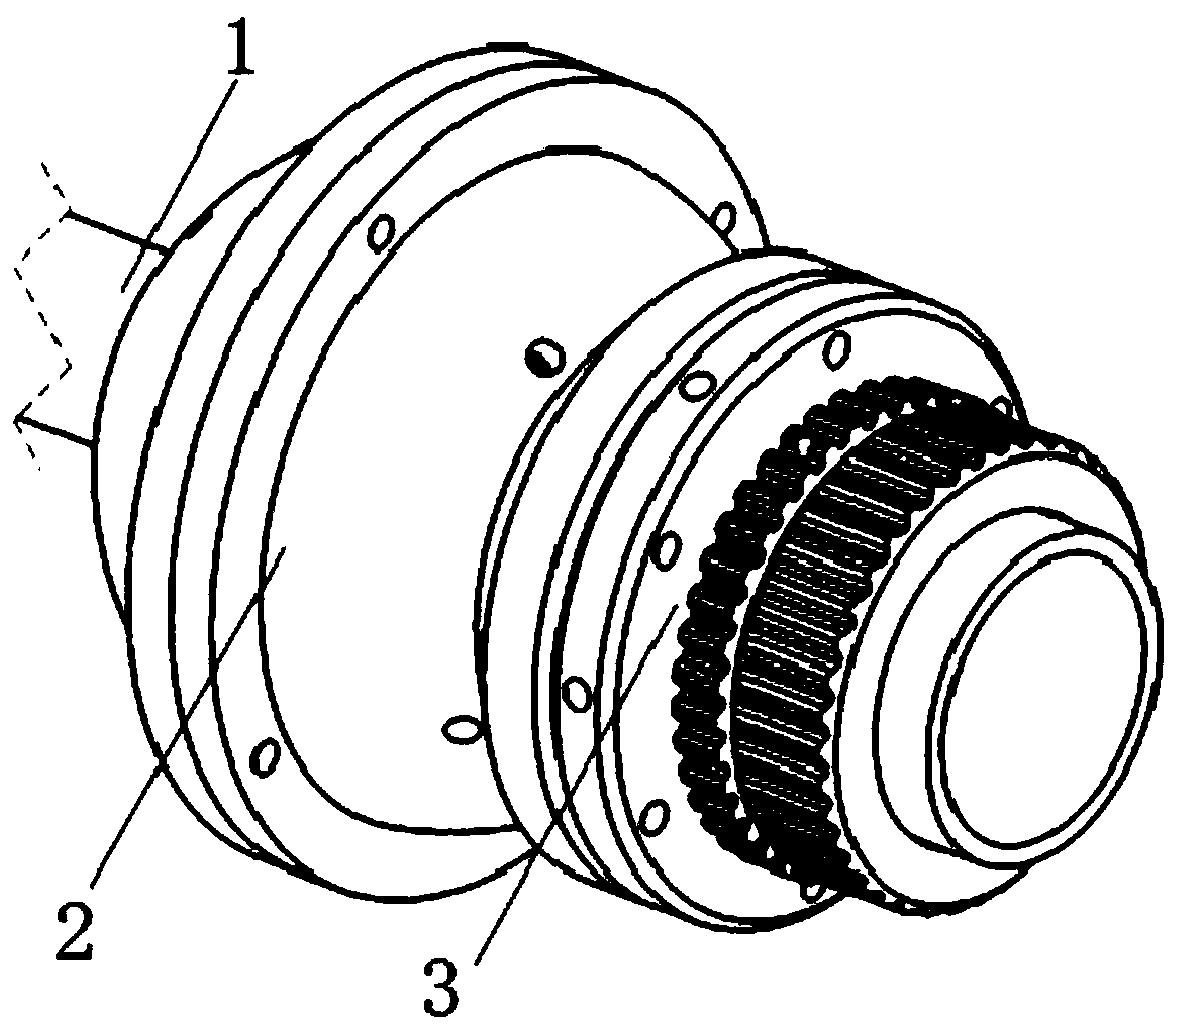 Device for adjusting rear intercept of lens and camera